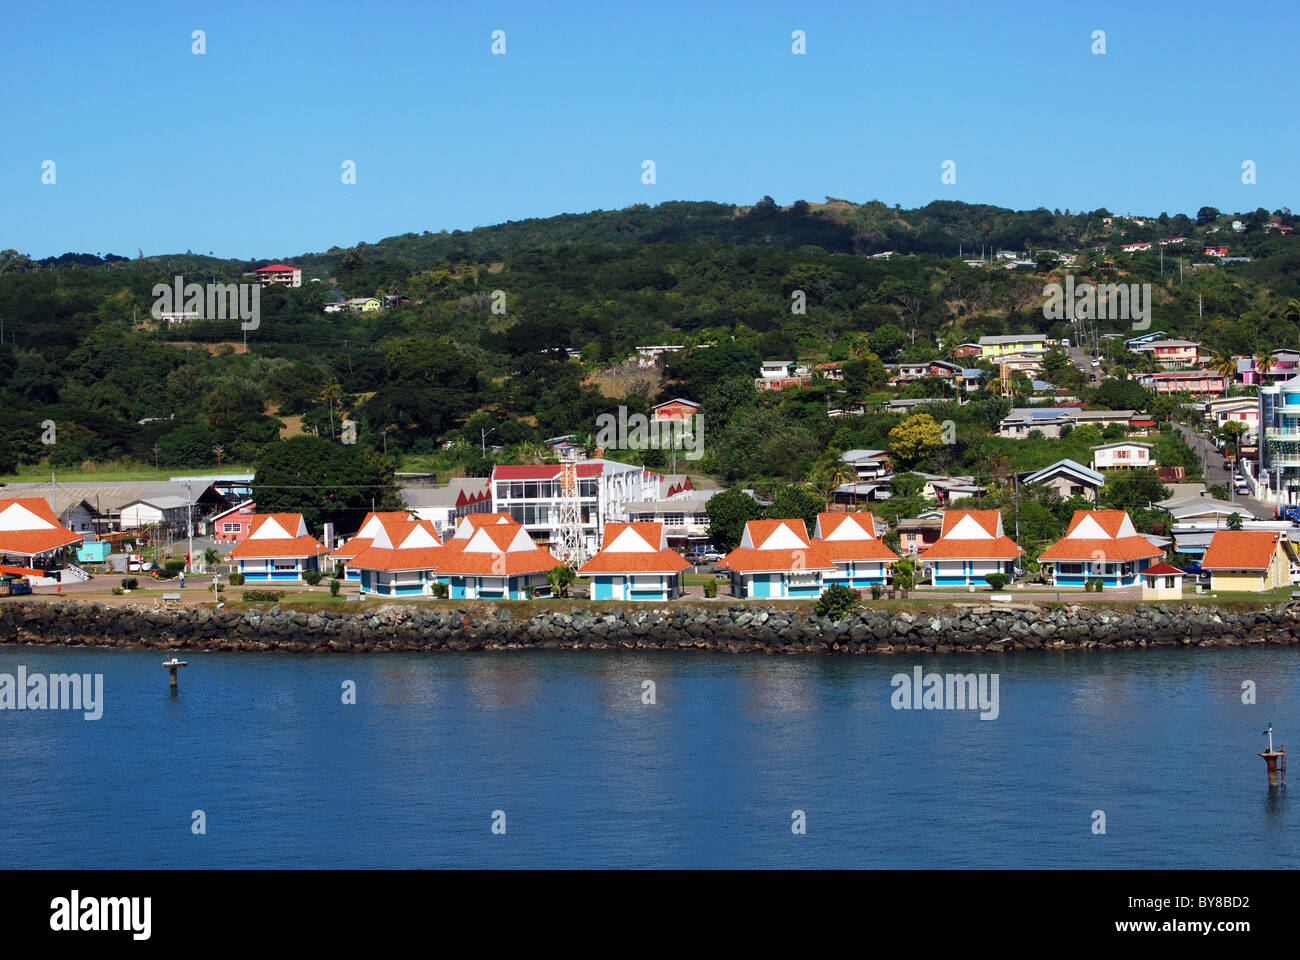 Waterside chalets with town to rear, Scarborough, Tobago, Trinidad and Tobago, Caribbean. Stock Photo